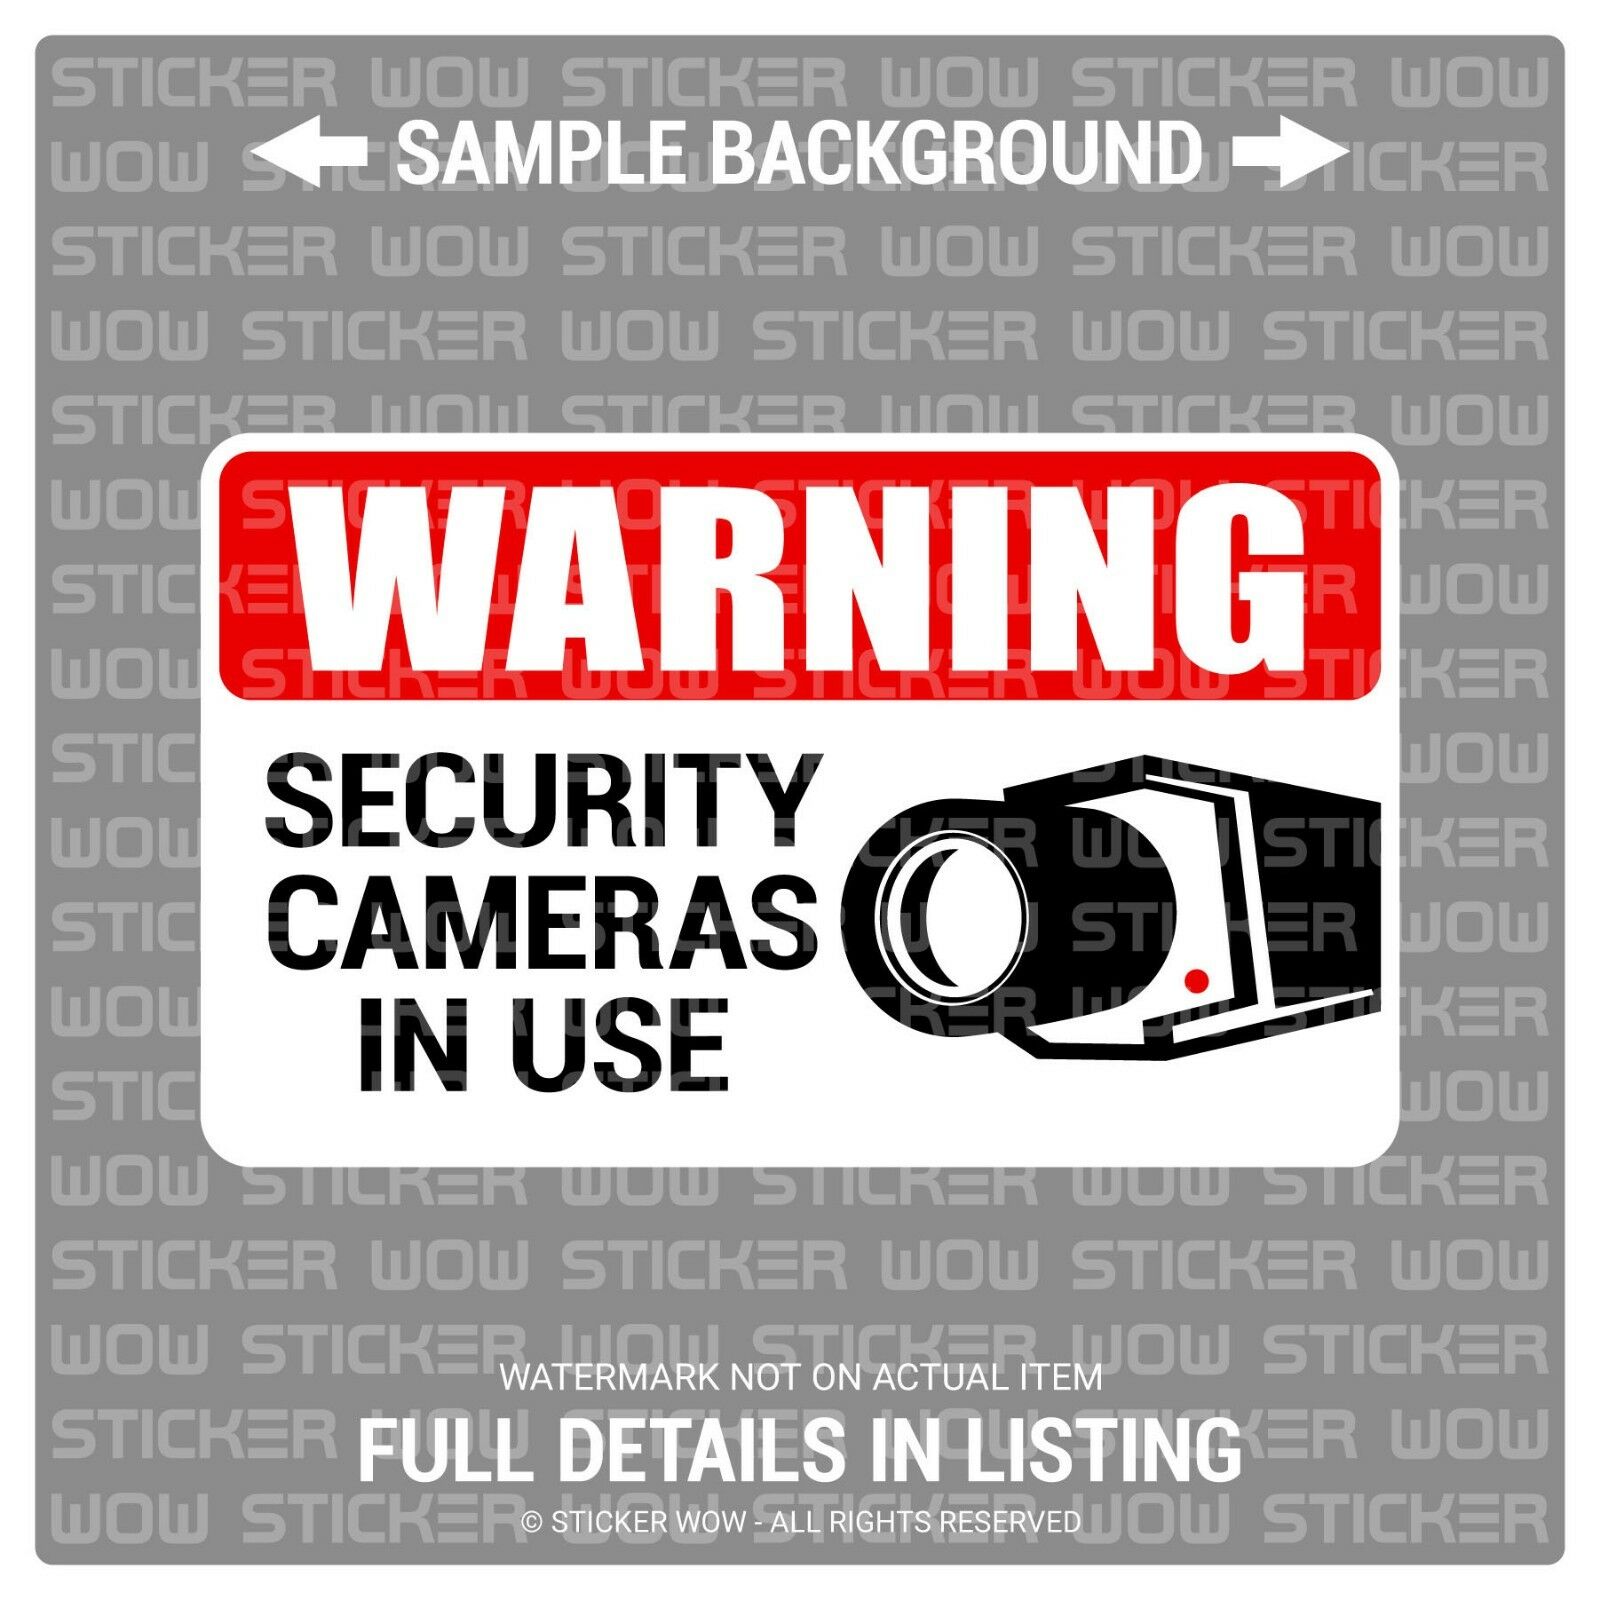 Decal Sticker Vinyl - Security Camera Warning Security Cameras In Use (x1) 5x3